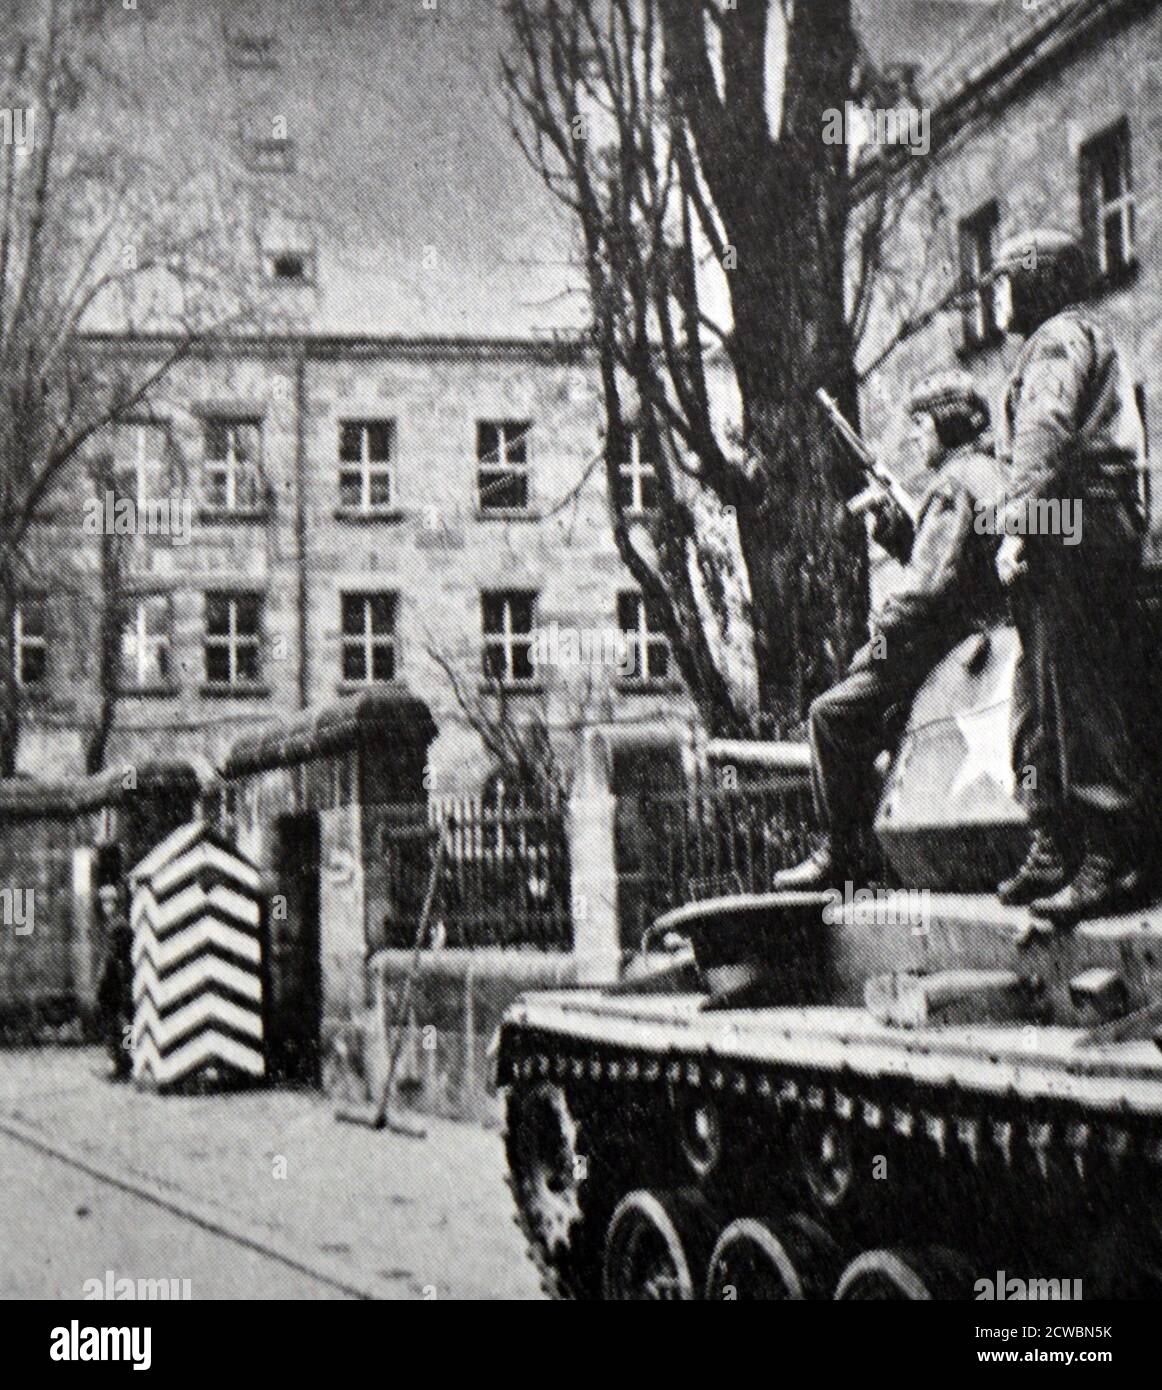 Black and white photograph of World War II (1939-1945) showing images related to the Nuremberg Trials, the largest prosecution in history, and which began in November 1945; the entrance of the prison in Nuremberg, guarded by Allied soldiers and a tank. Stock Photo